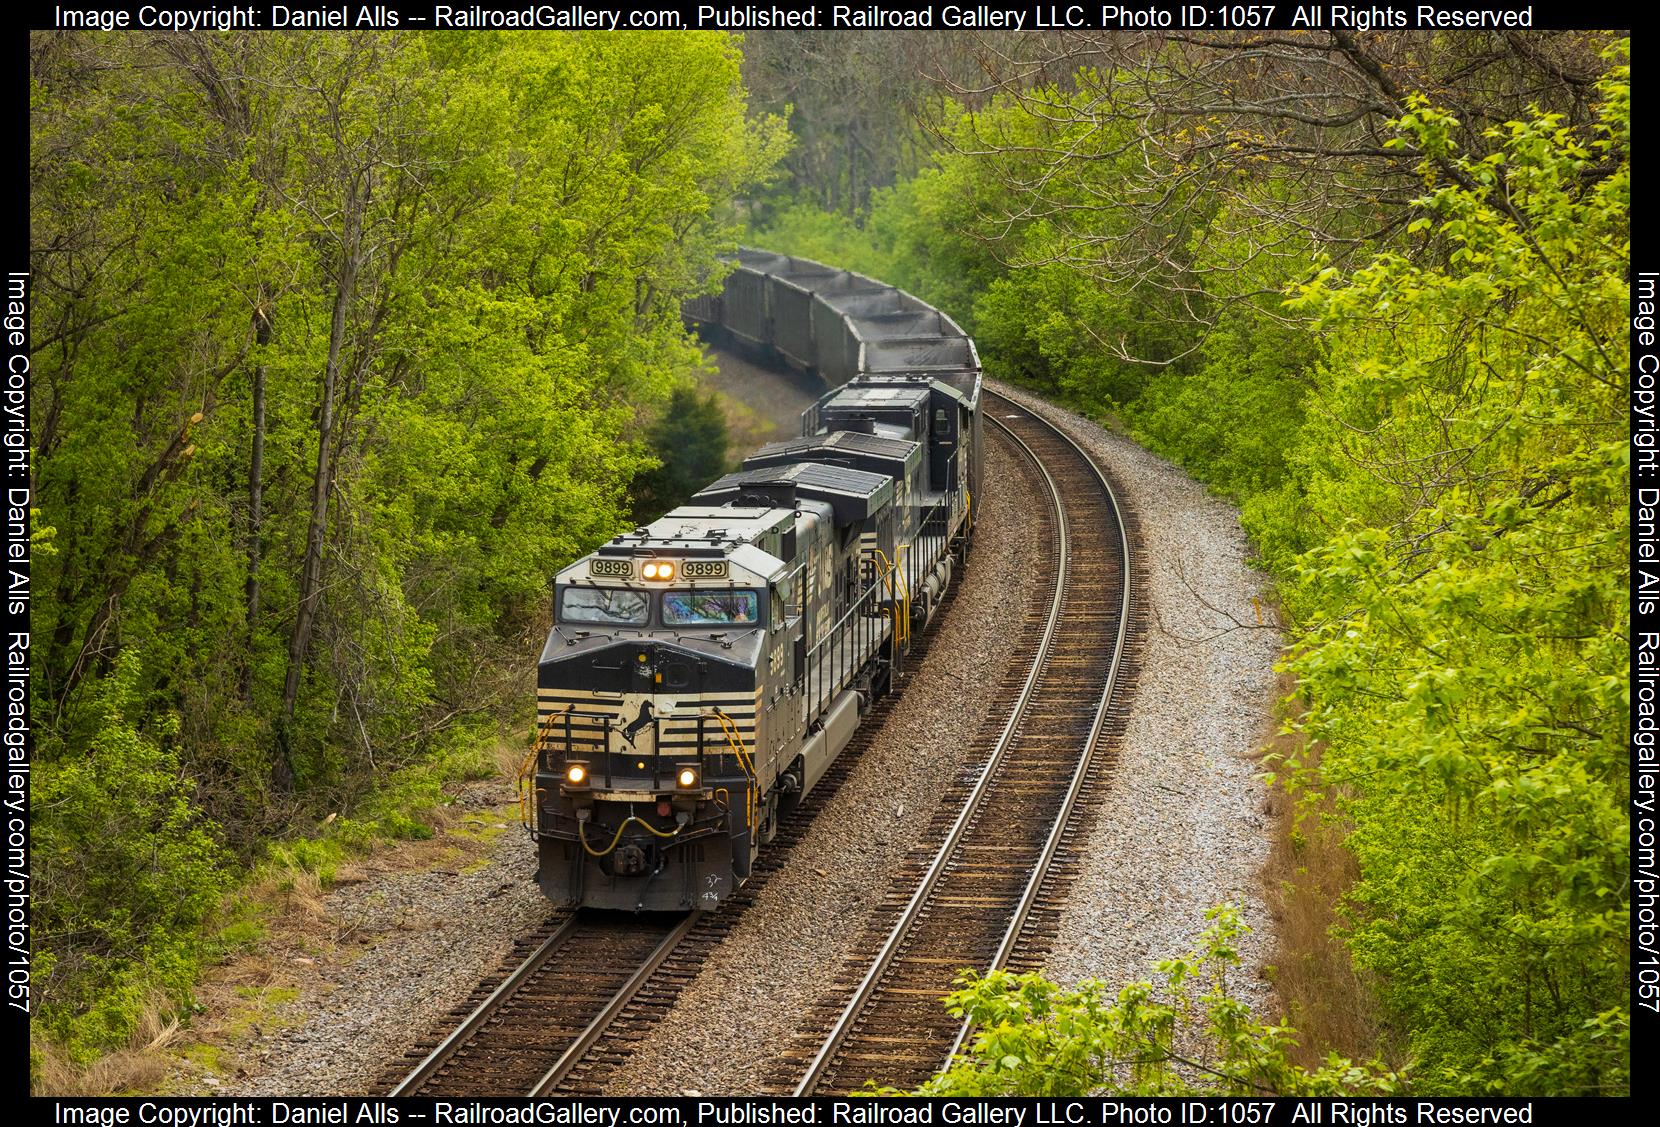 NS 9899 is a class Dash 9 and  is pictured in Elliston, Virginia, United States.  This was taken along the Christiansburg District  on the Norfolk Southern. Photo Copyright: Daniel Alls uploaded to Railroad Gallery on 05/10/2023. This photograph of NS 9899 was taken on Wednesday, May 10, 2023. All Rights Reserved. 